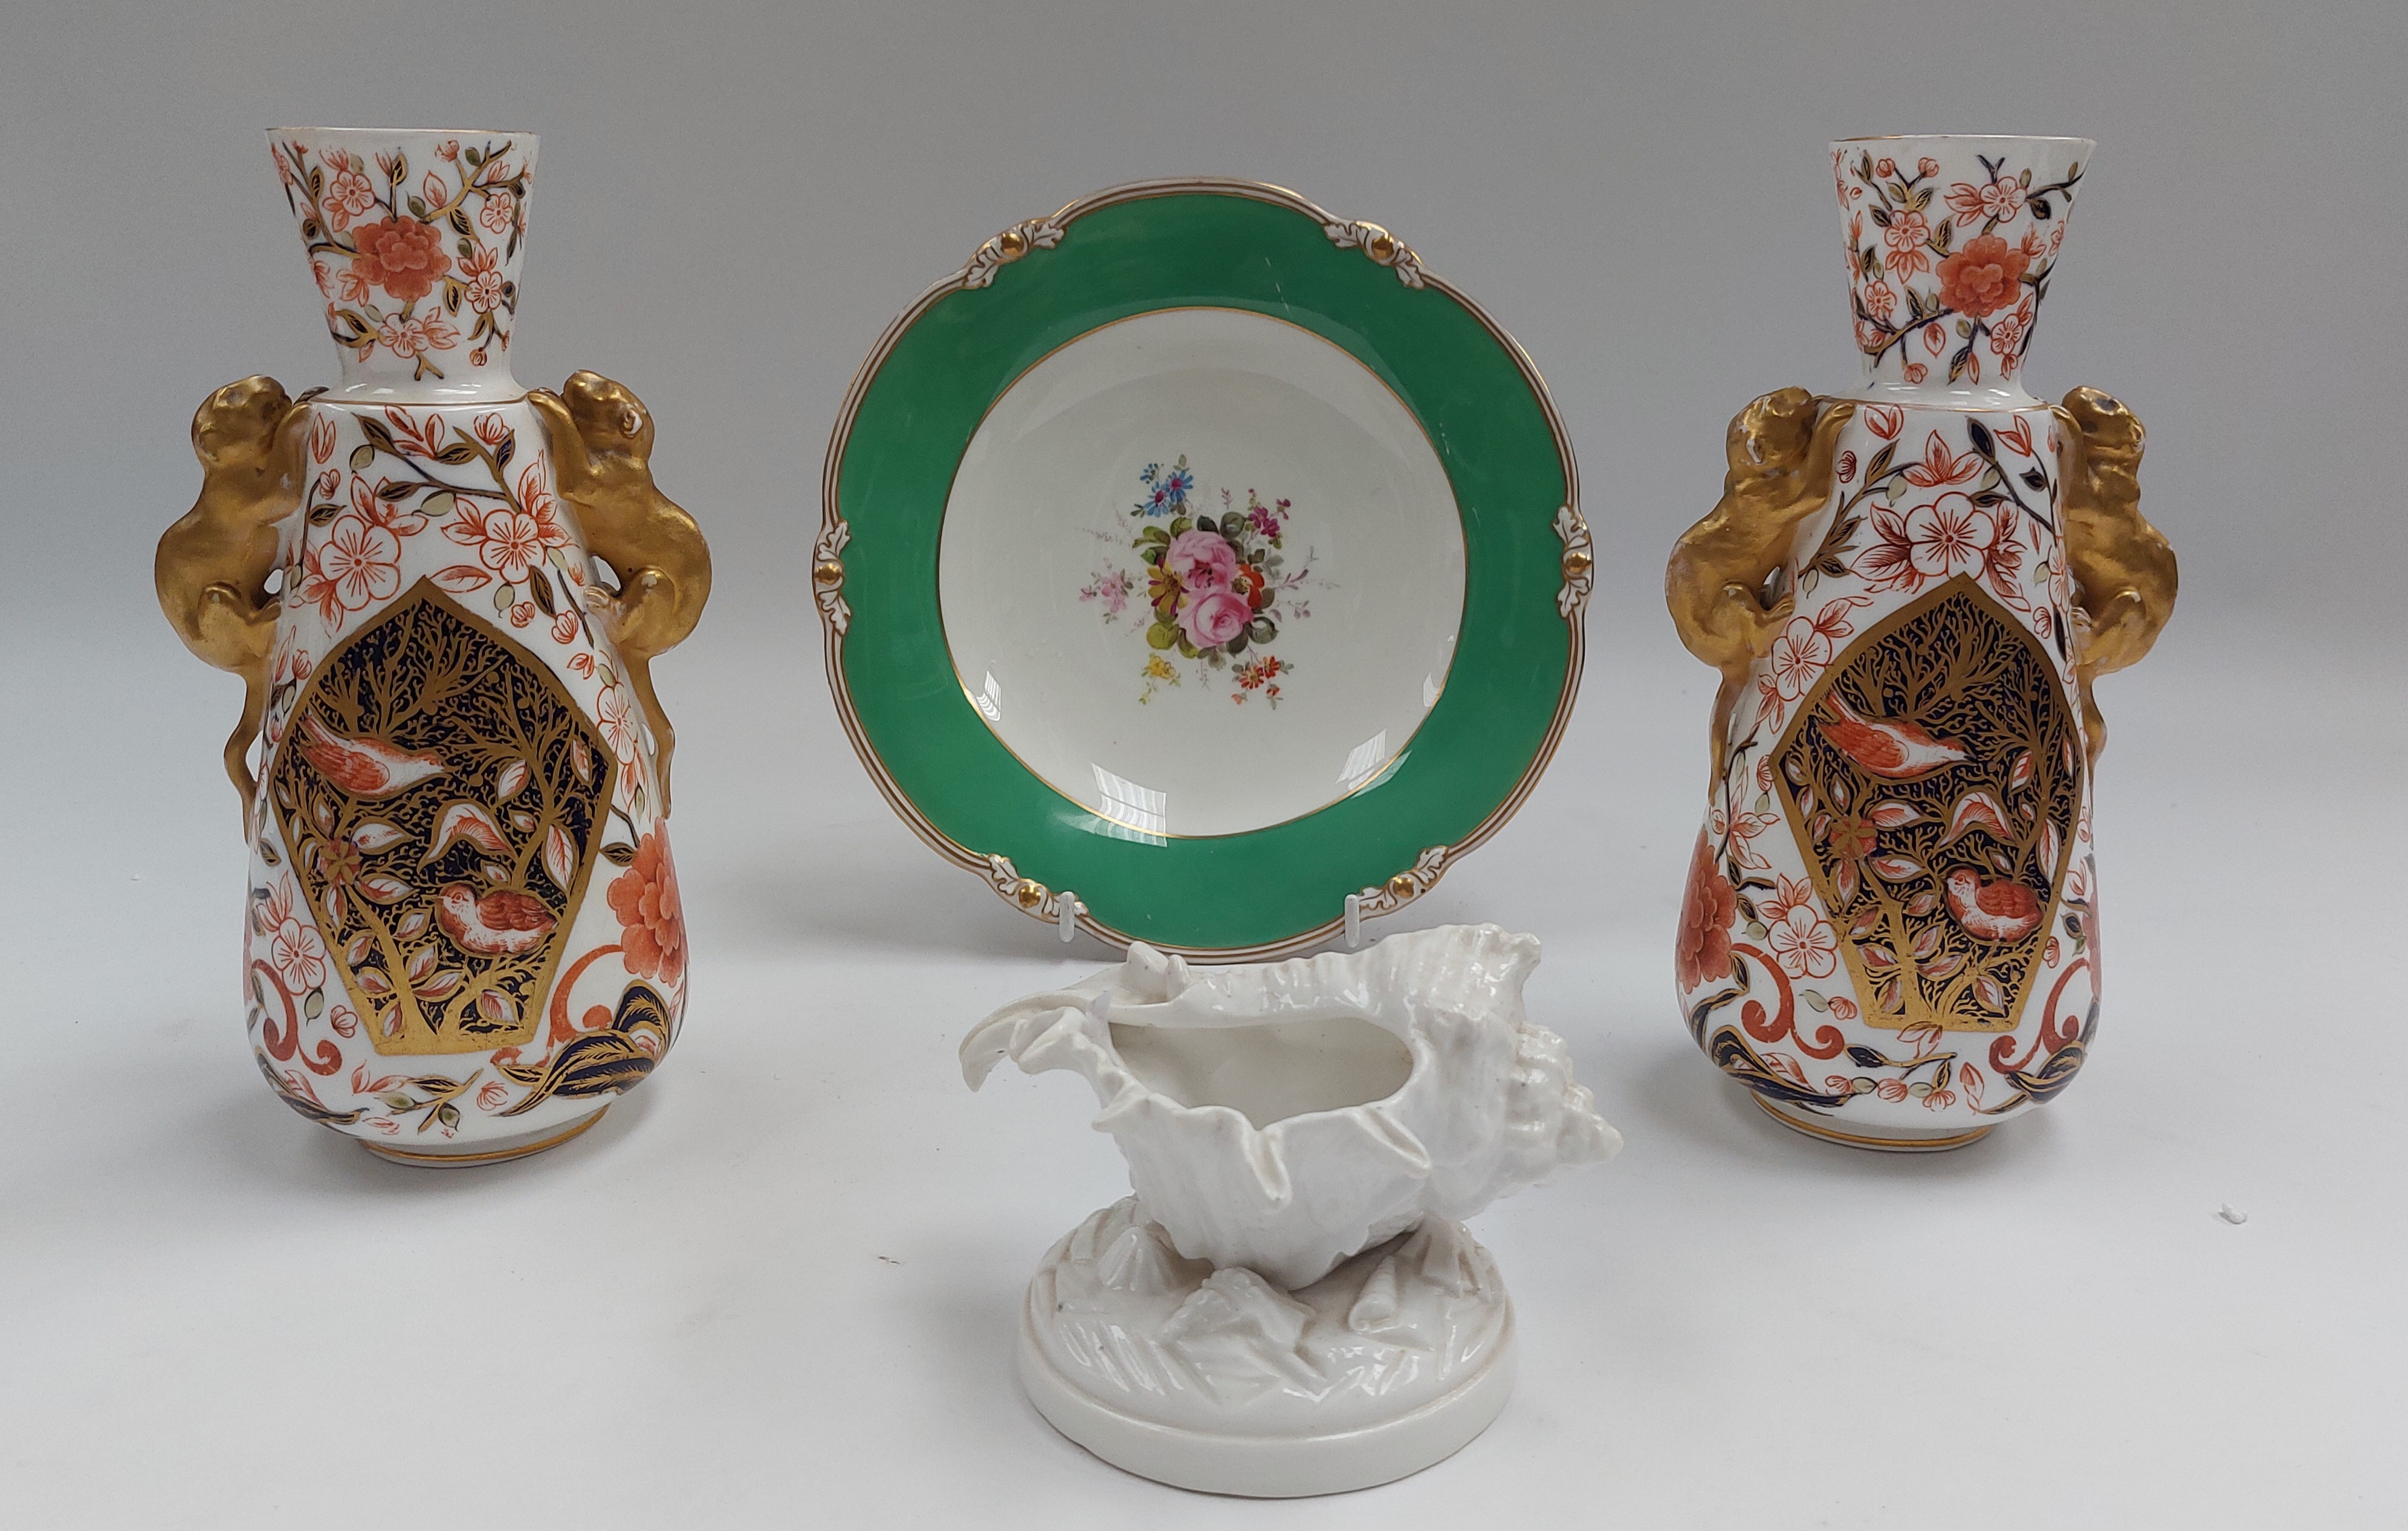 A pair of late 19th Century Royal Crown Derby vases, an early 20th Century Royal Crown Derby comport